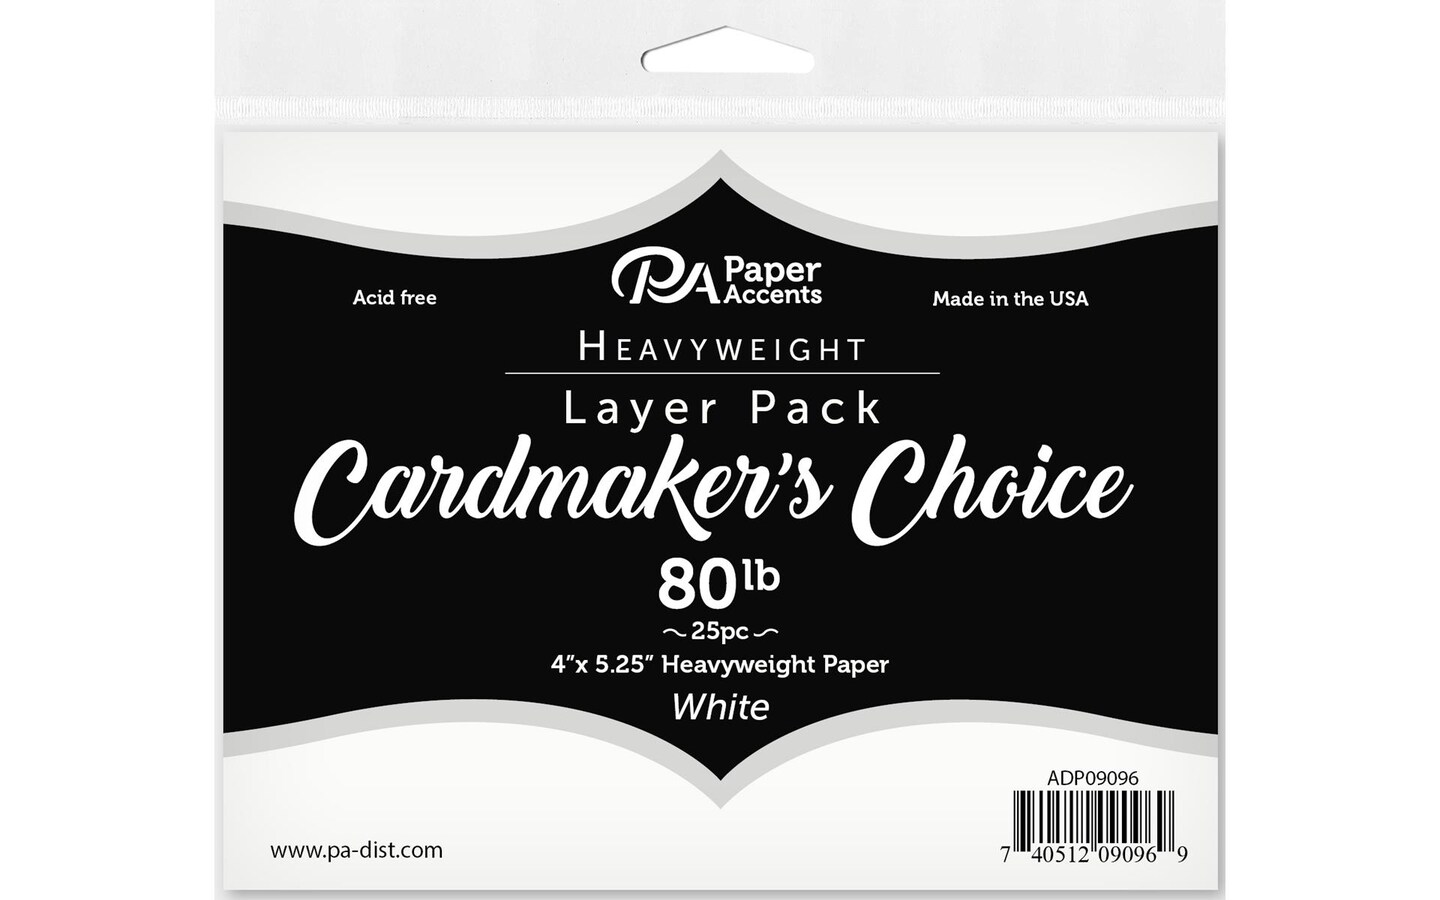 Cardmakers Choice Card Layer 4x5.25 80lb Wht 25pc